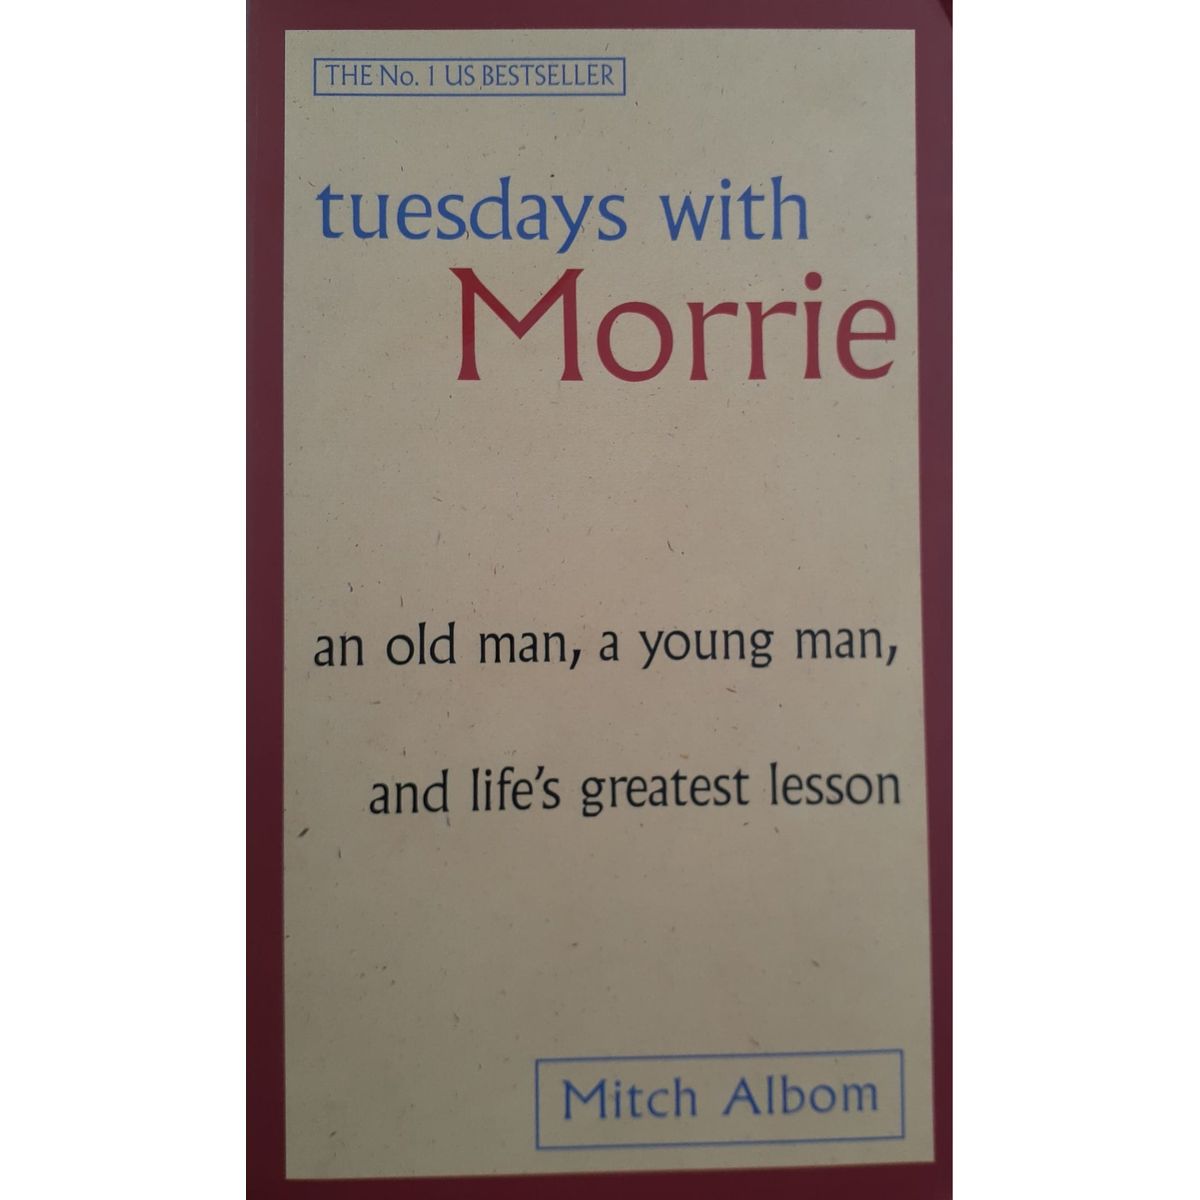 ISBN: 9780751527377 / 0751527378 - Tuesdays with Morrie by Mitch Albom [2000]